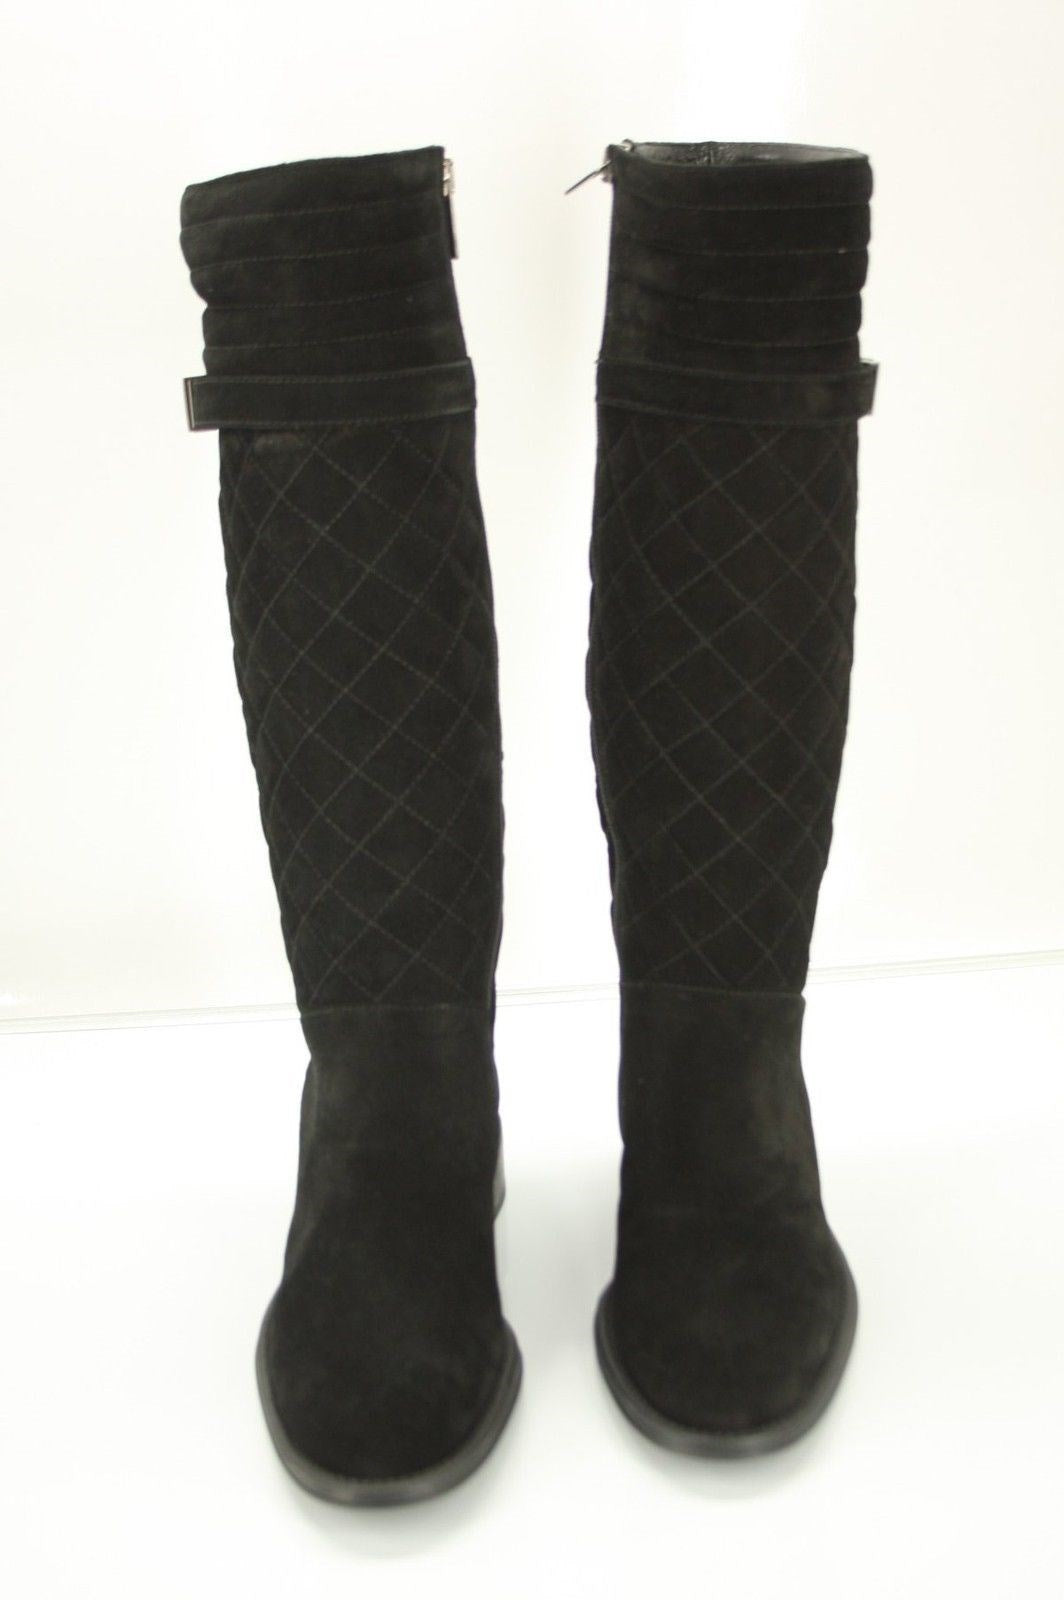 Aquatalia by Marvin K Black Suede Unveil Quilted Riding Boot Size 6.5 NIB Italy